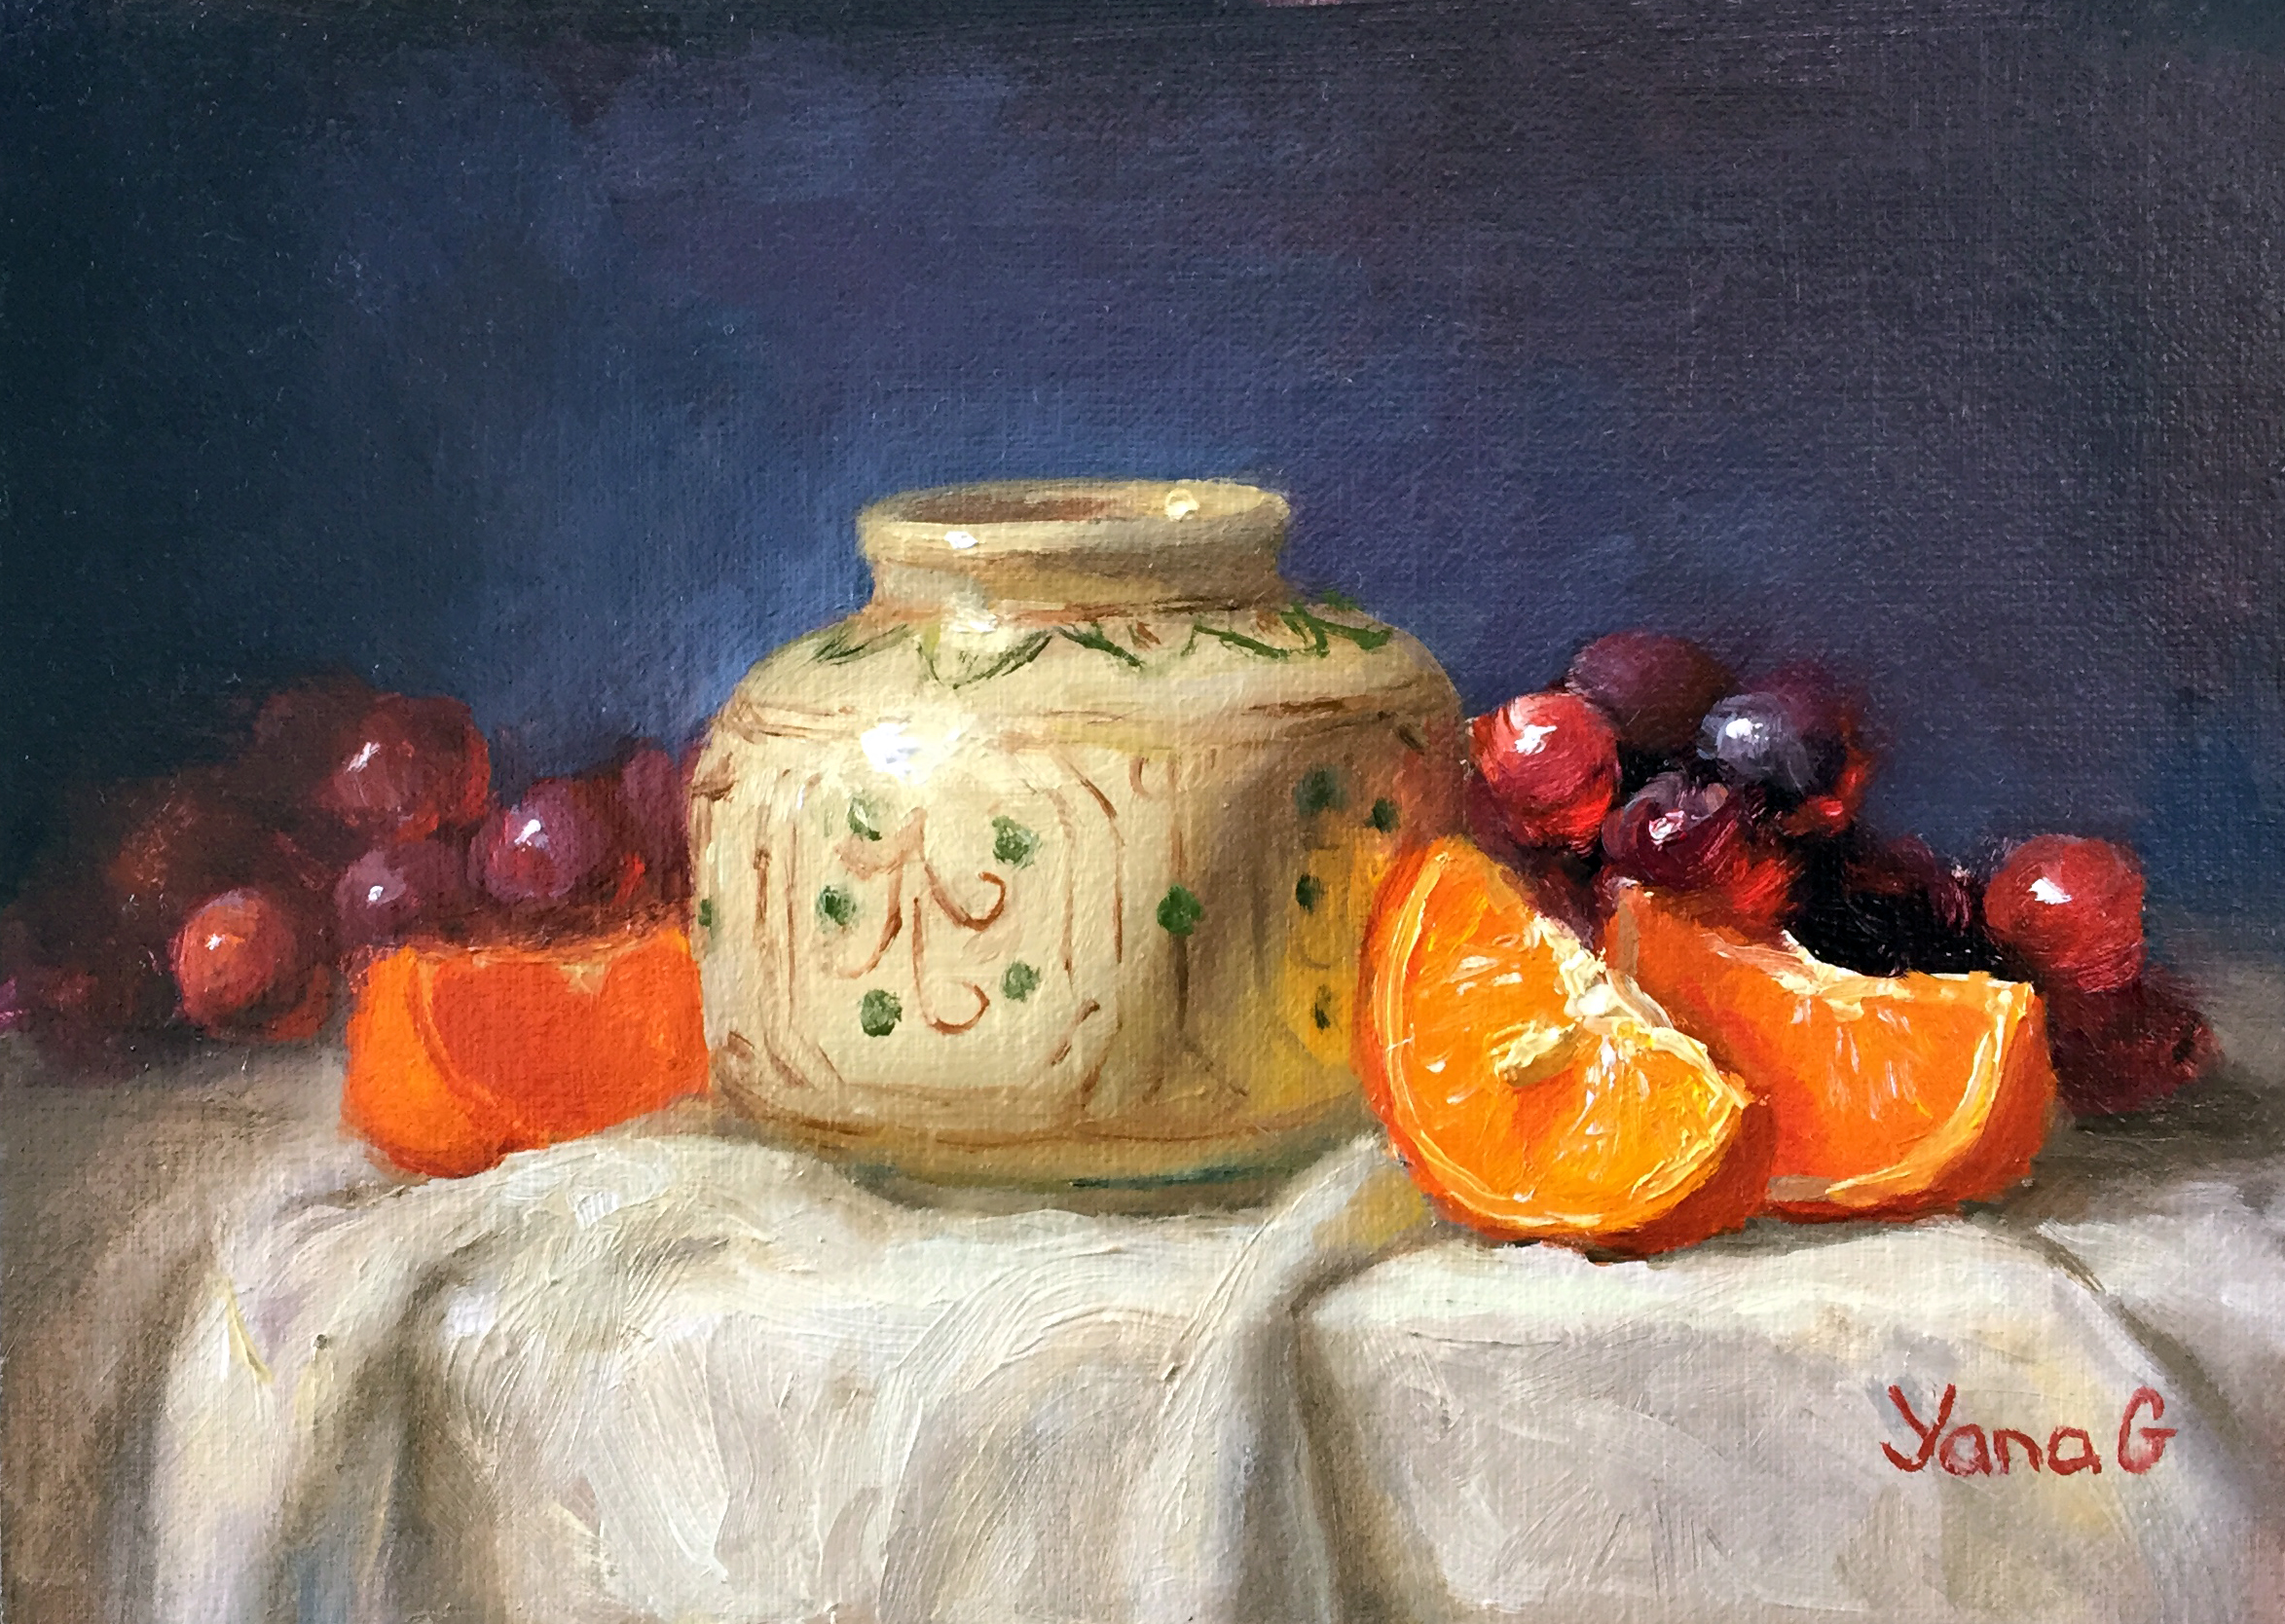 Still life with Orange Slices and vase 5X7 Oil on linen